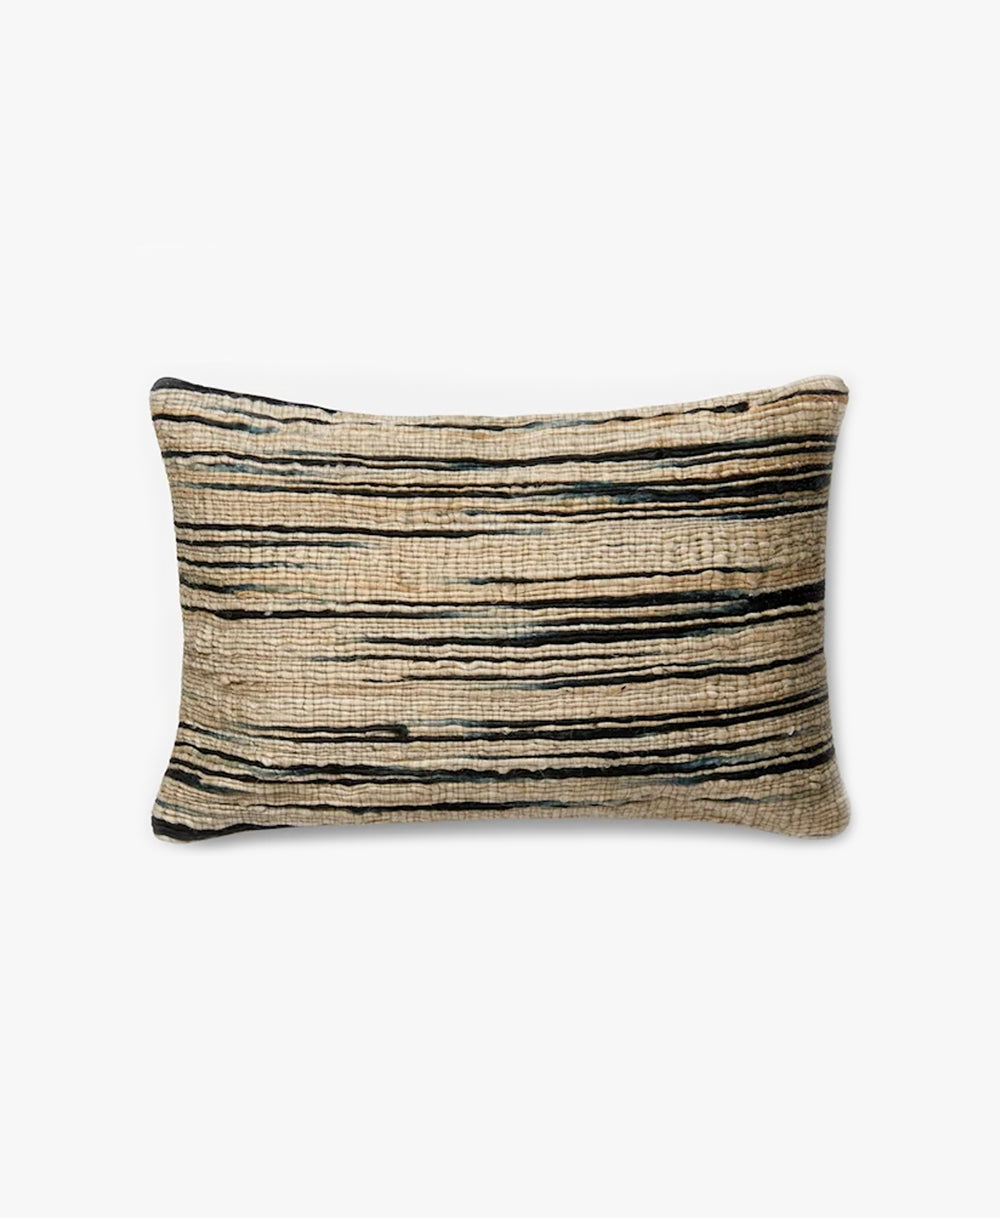 P4014 Space Dyed Jute Pillow - Navy/Beige